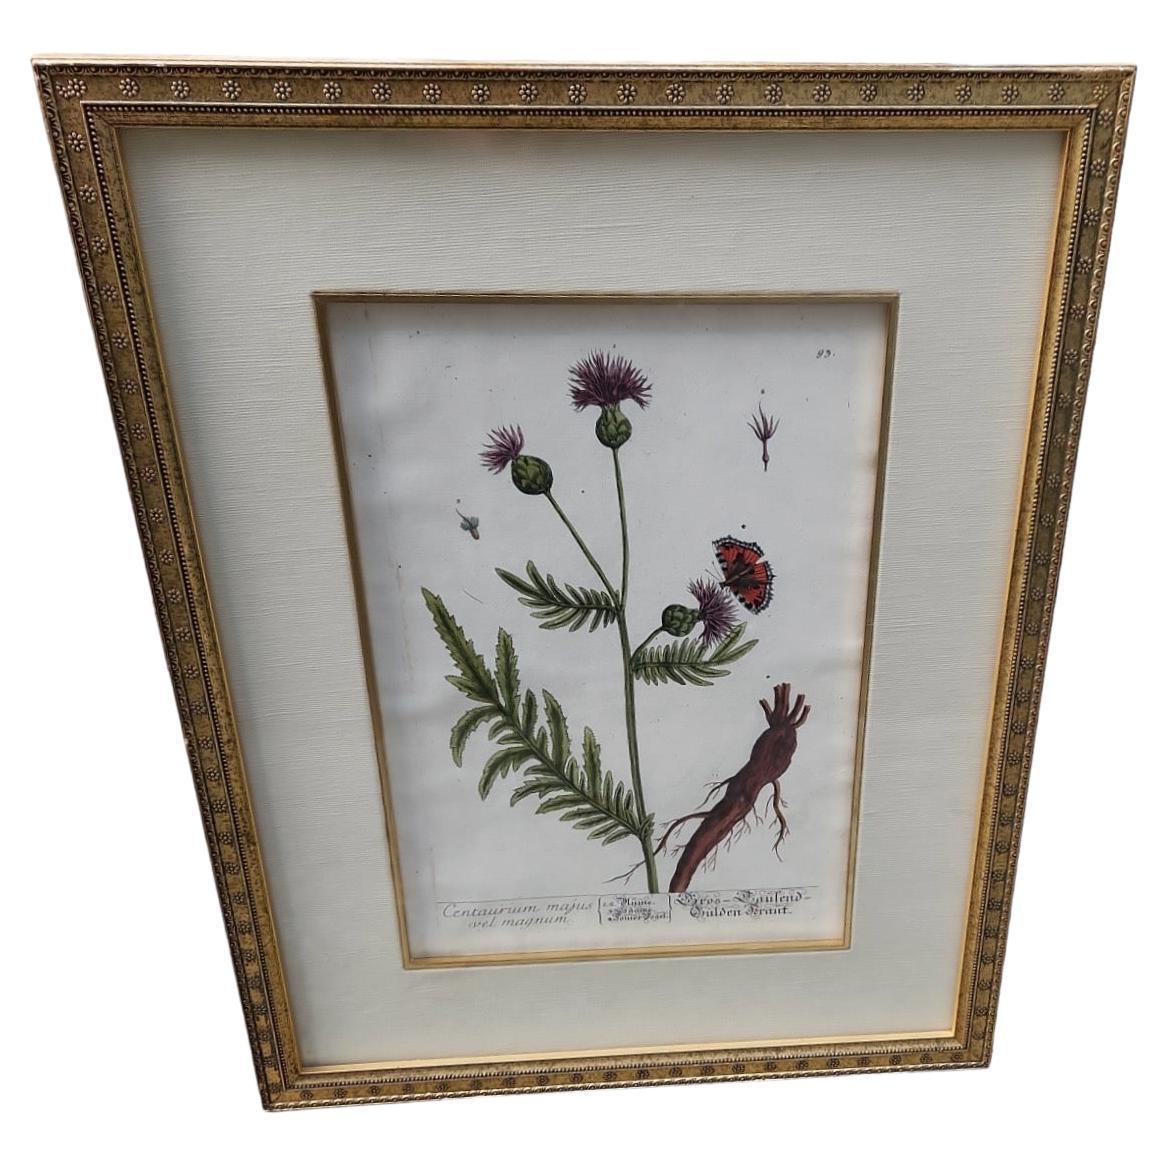 18th Century Elizabeth Blackwell Hand Tinted Botanicals - 4 Available For Sale